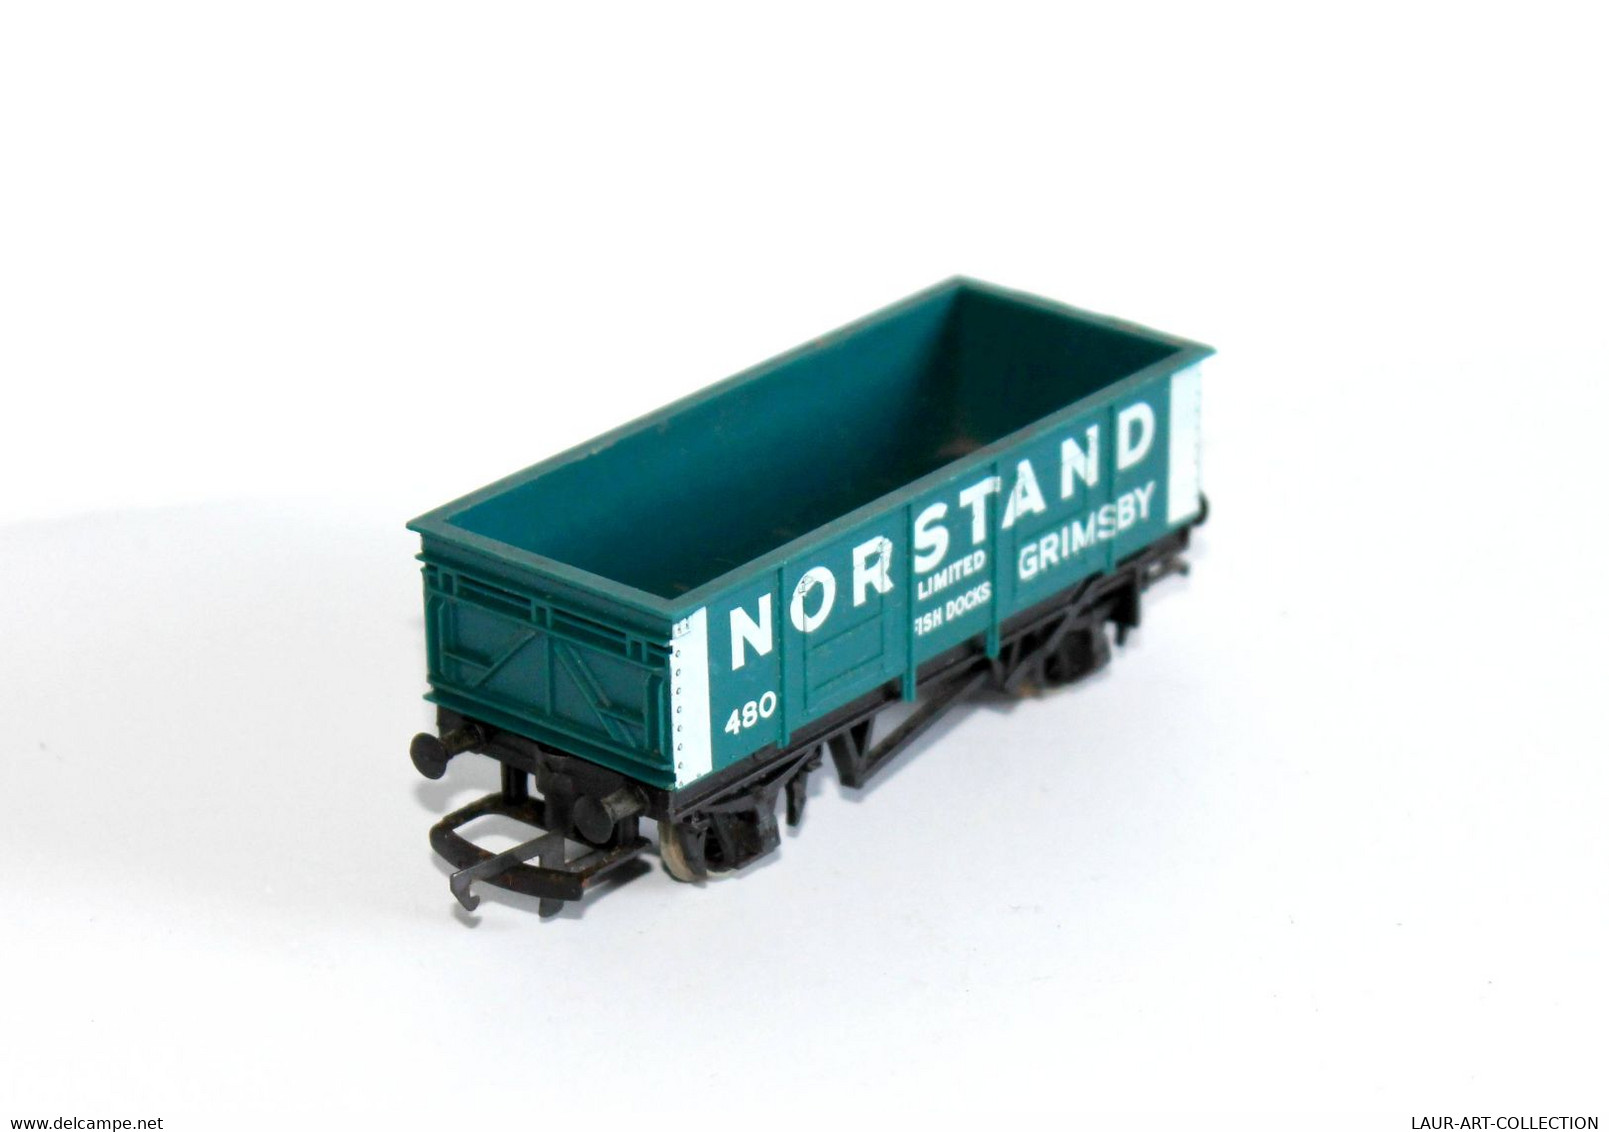 HORNBY RAILWAYS - WAGON TOMBEREAU MARCHANDISE - NORSTAND 480 GRIMSBY, FISH DOCK FERROVIAIRE TRAIN CHEMIN FER  (2304.106) - Goods Waggons (wagons)